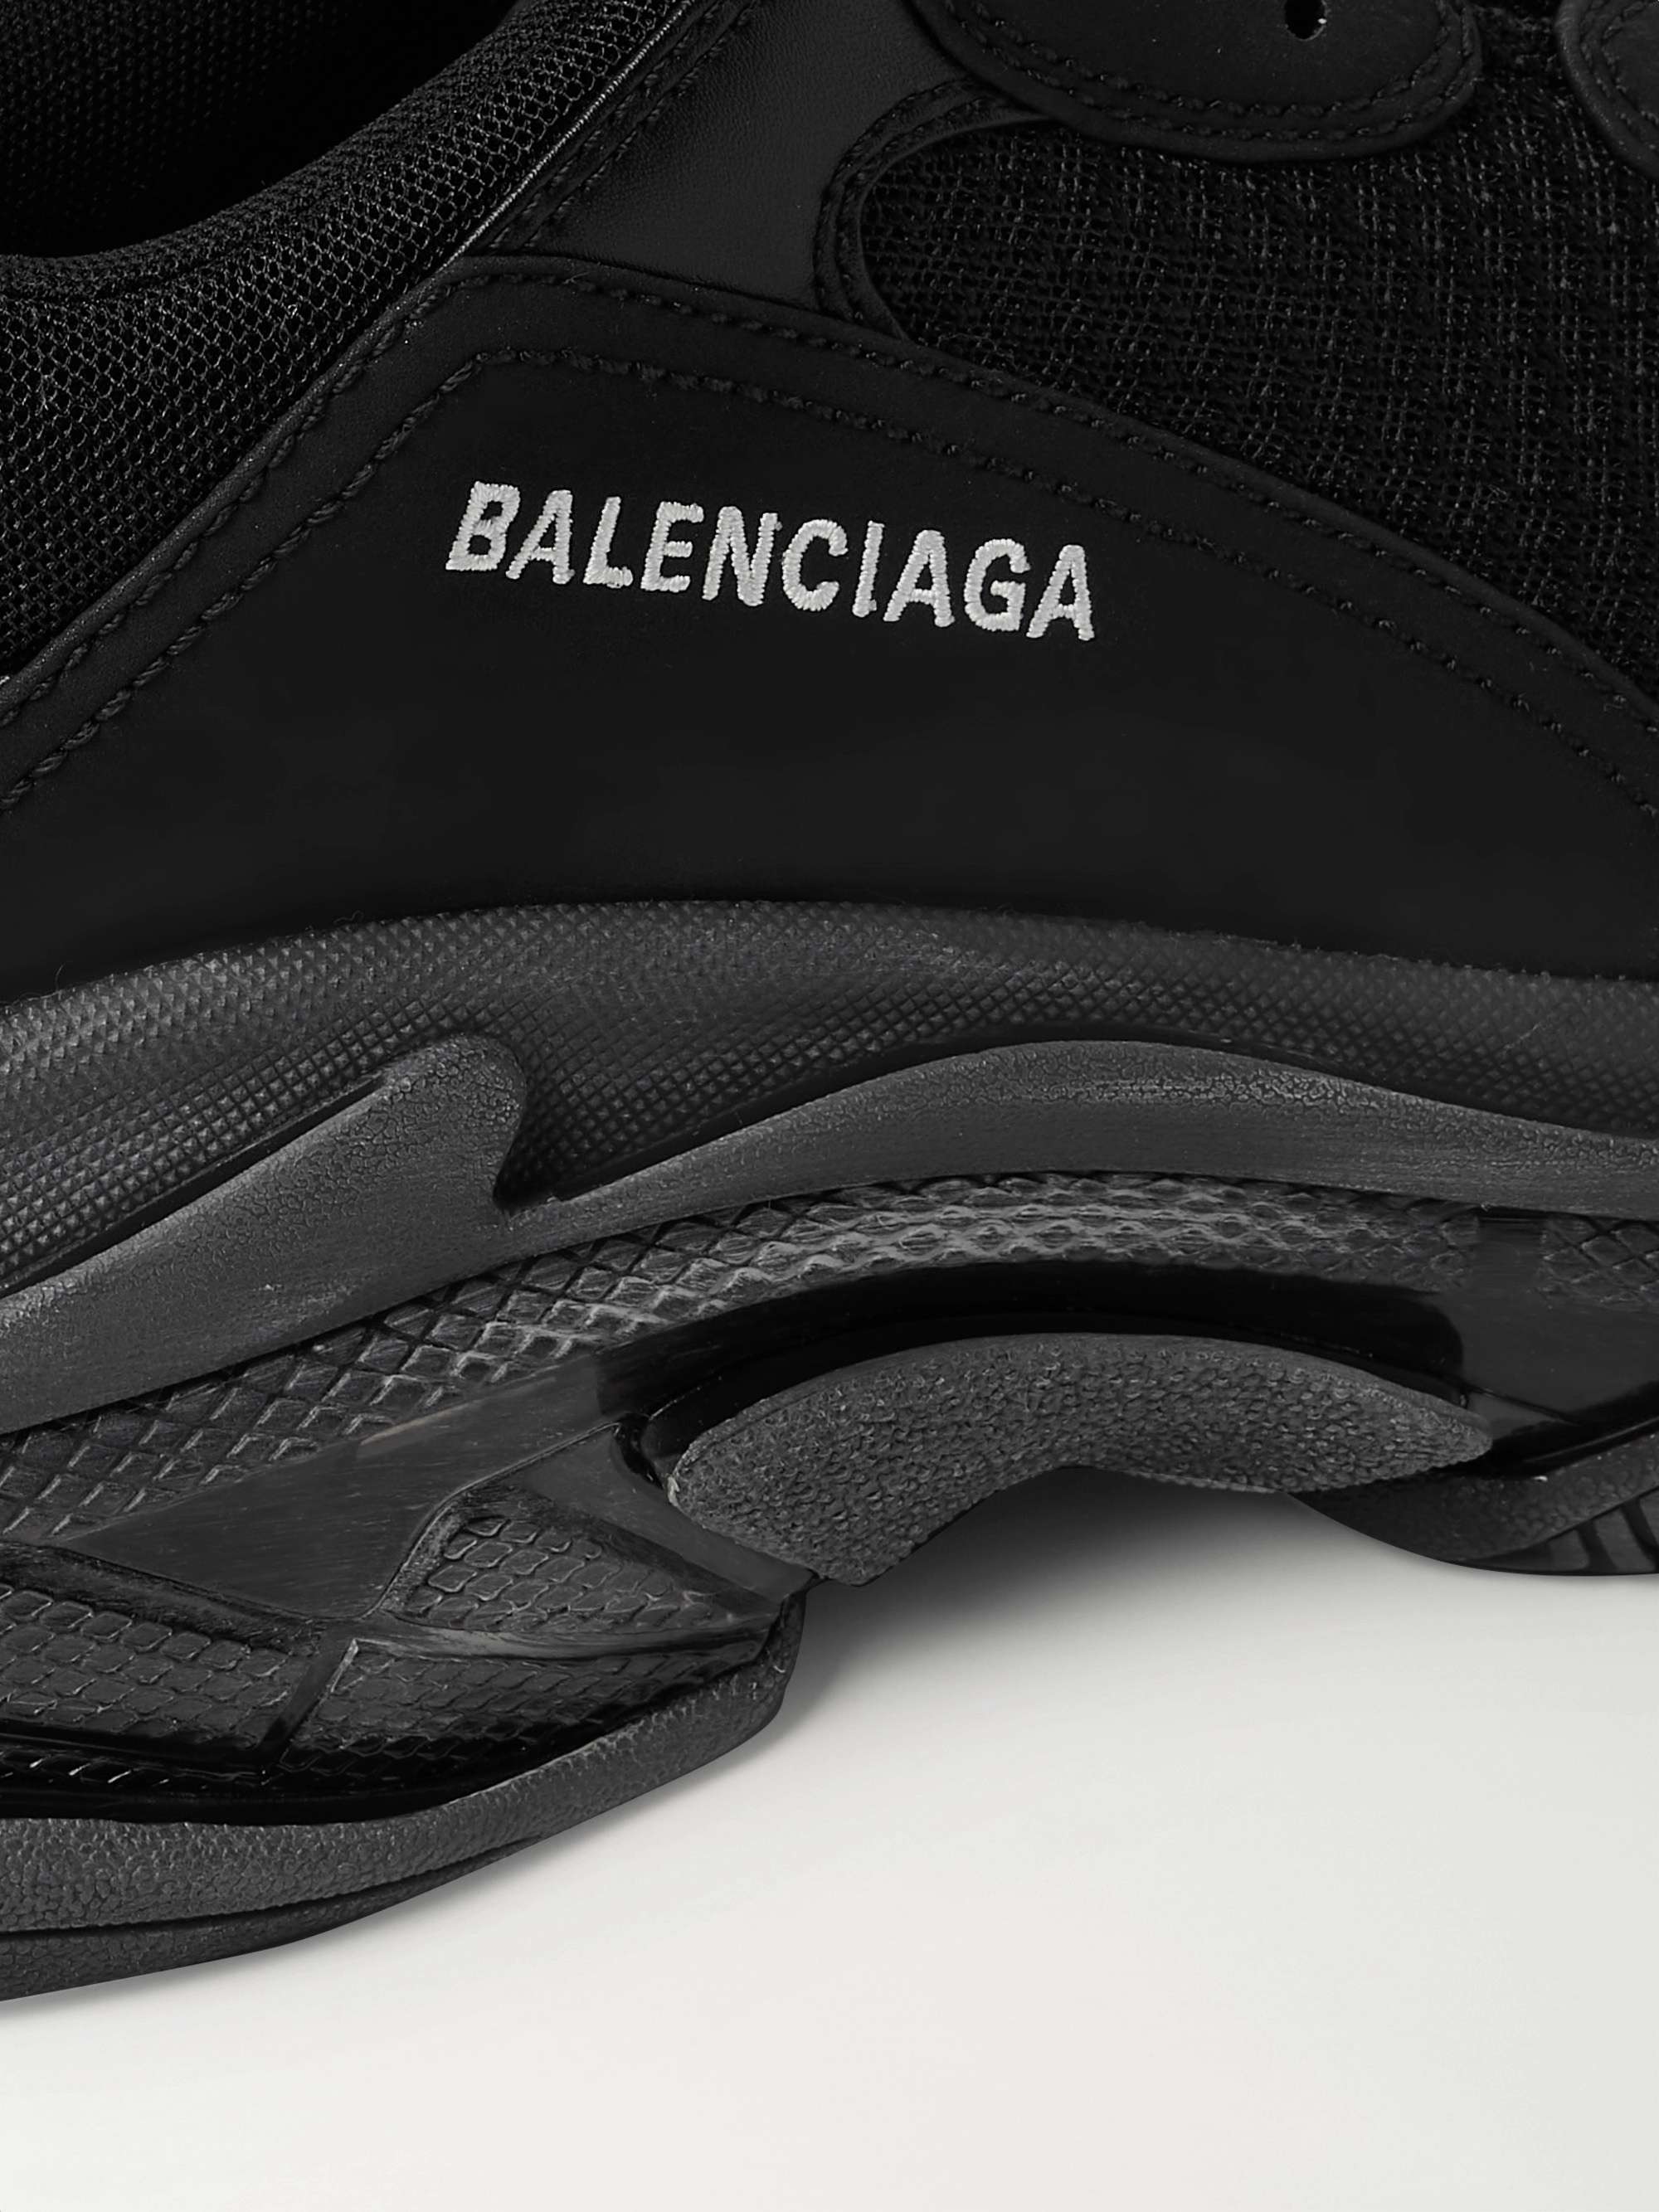 BALENCIAGA Triple S Clear Sole Mesh, Nubuck and Leather Sneakers | MR PORTER